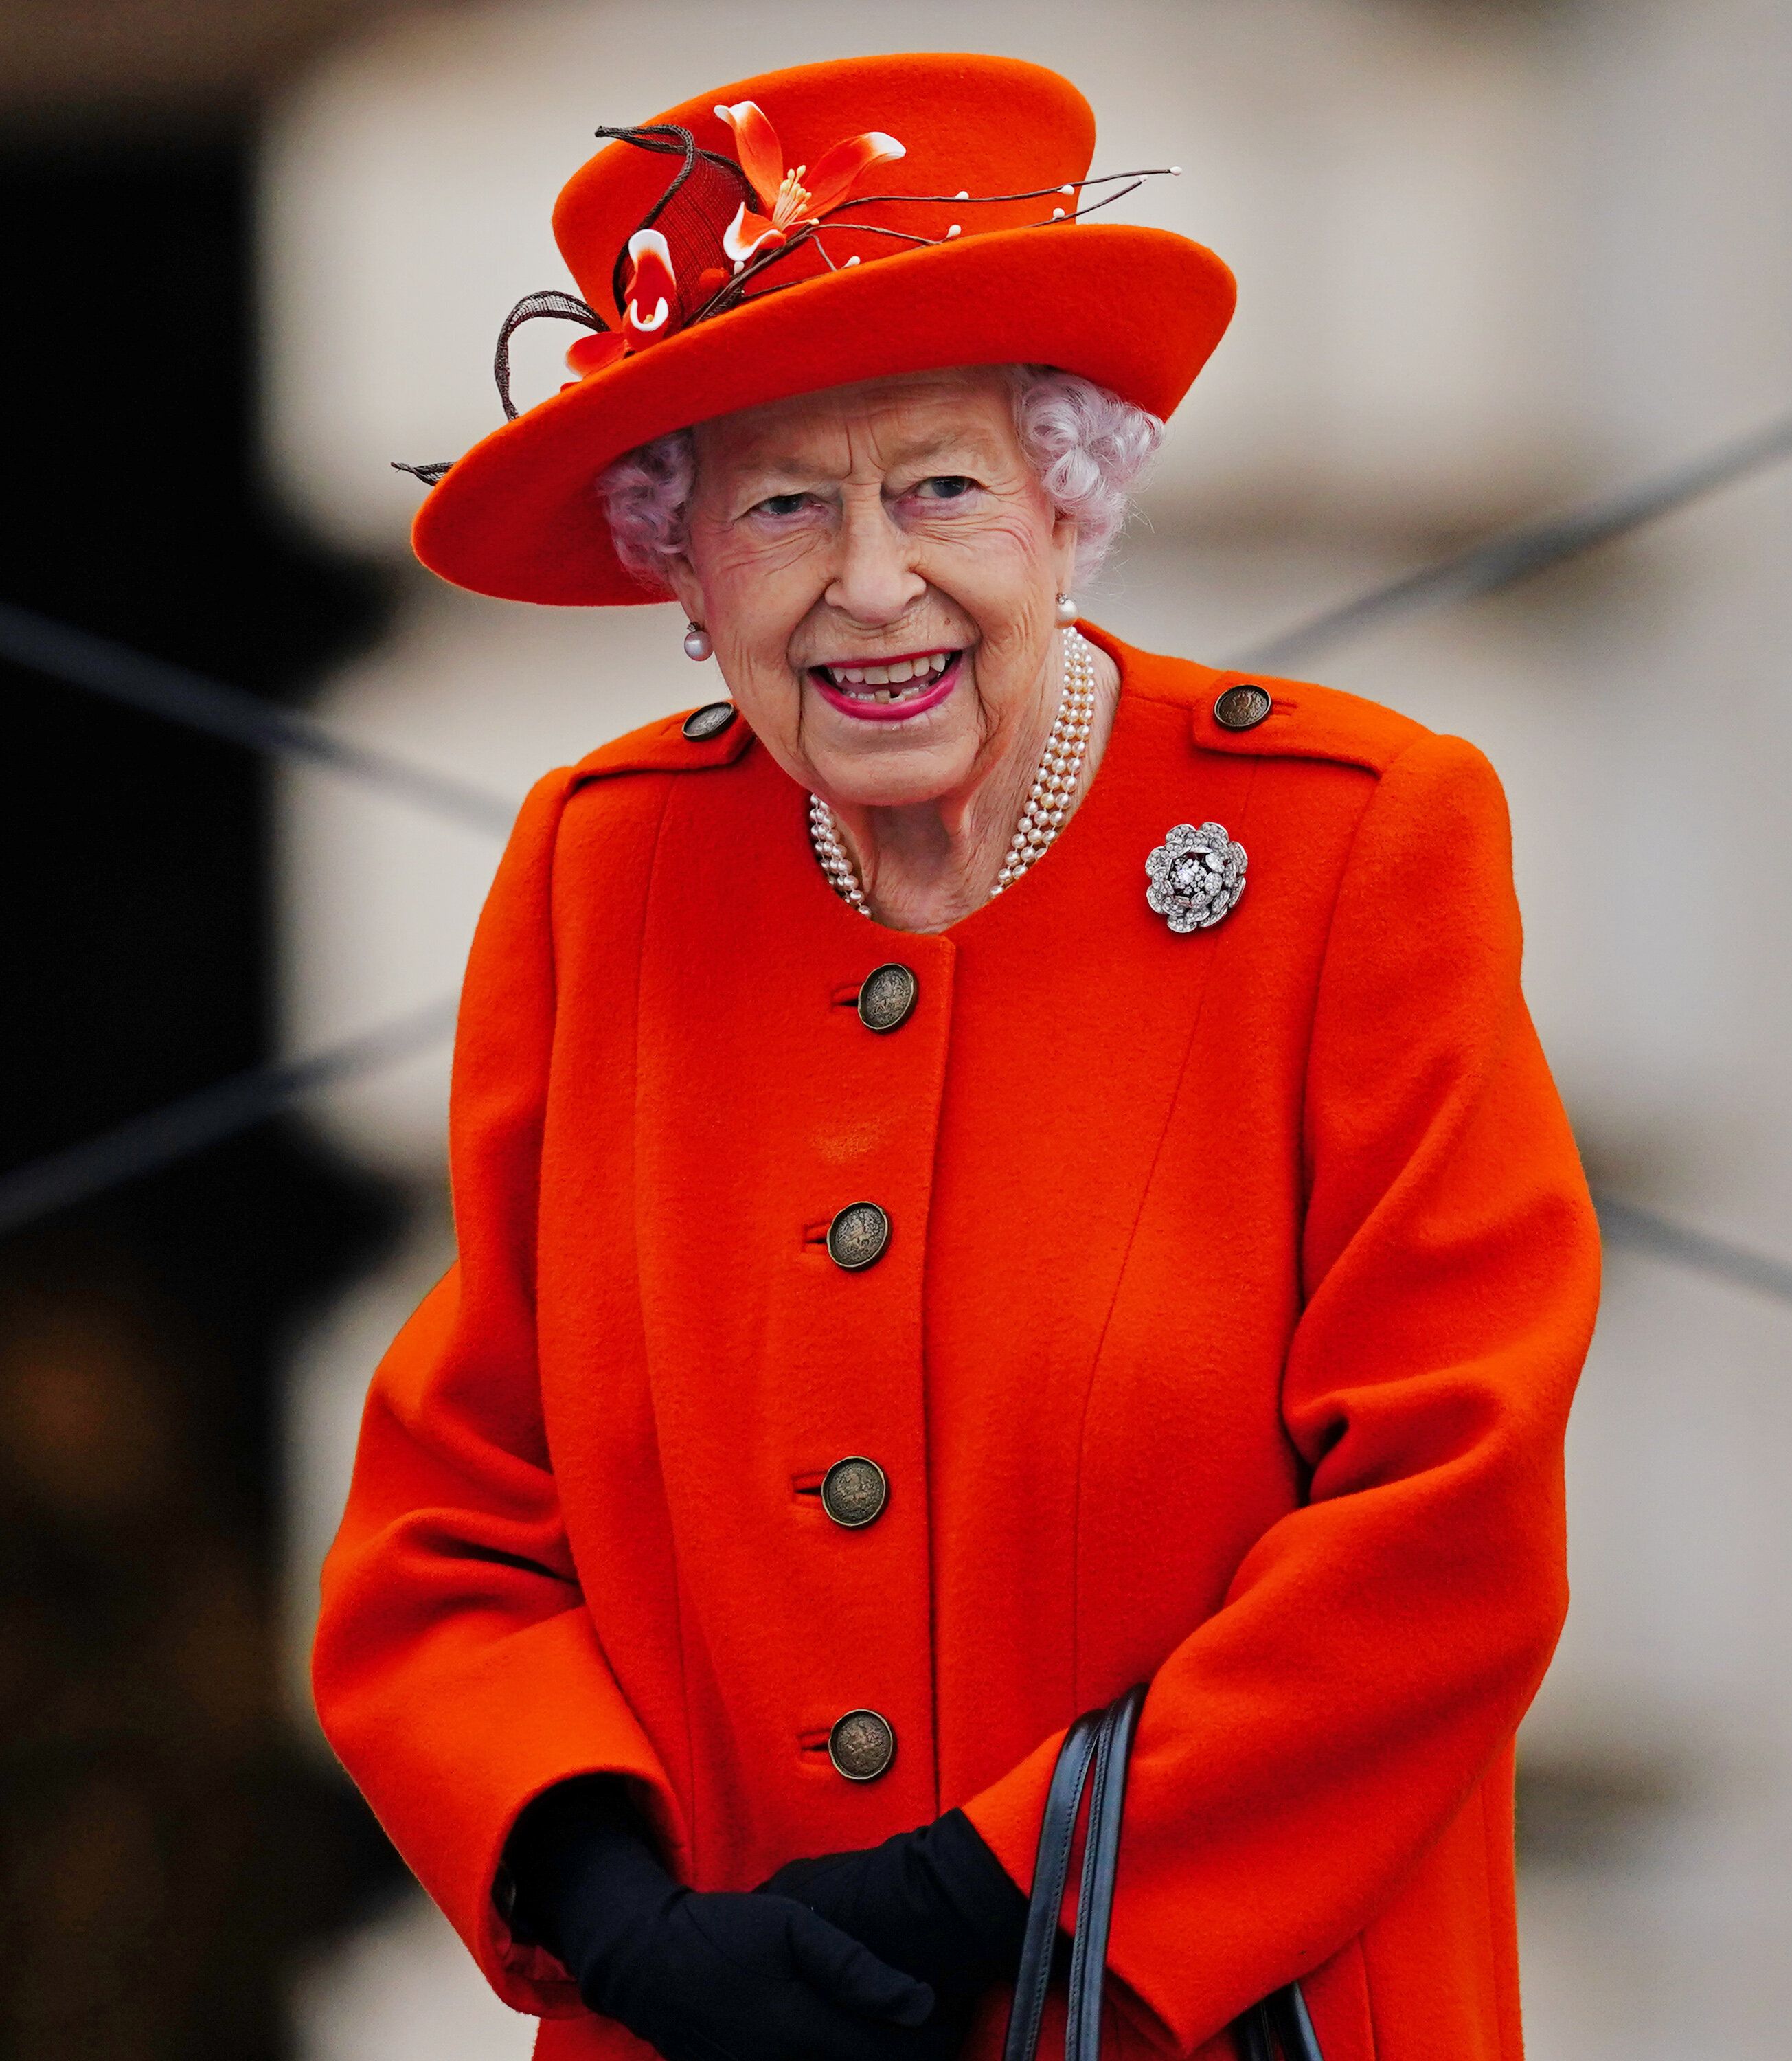 Queen Elizabeth attends the launch of the Queen's Baton Relay for Birmingham 2022, the XXII Commonwealth Games at Buckingham Palace on Oct. 7 in London.